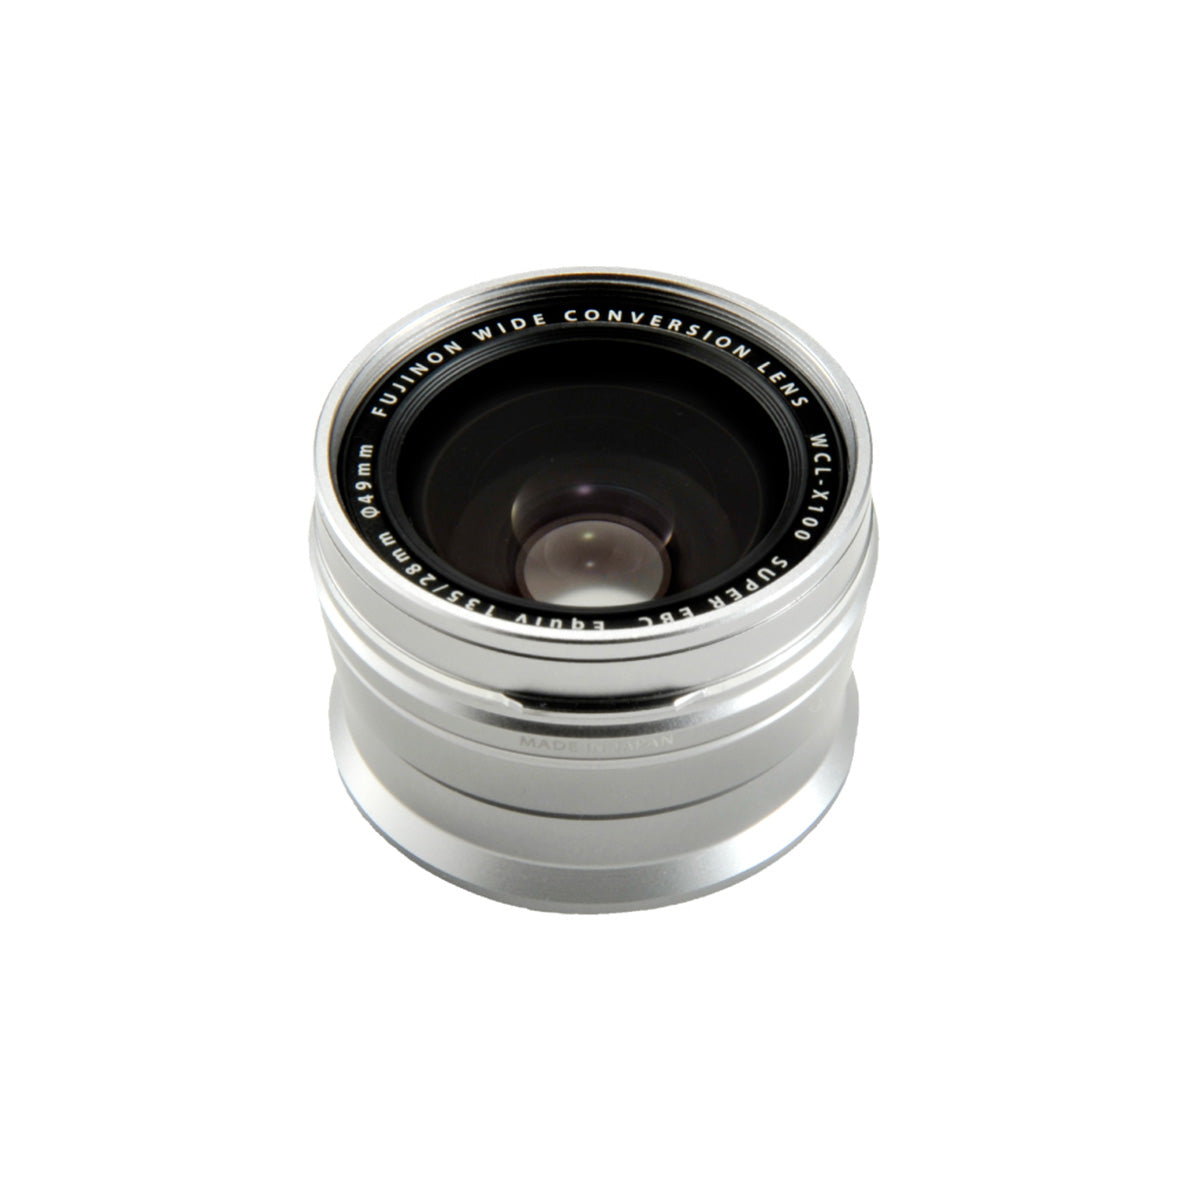 WCL-X100 II Wide Conversion Lens